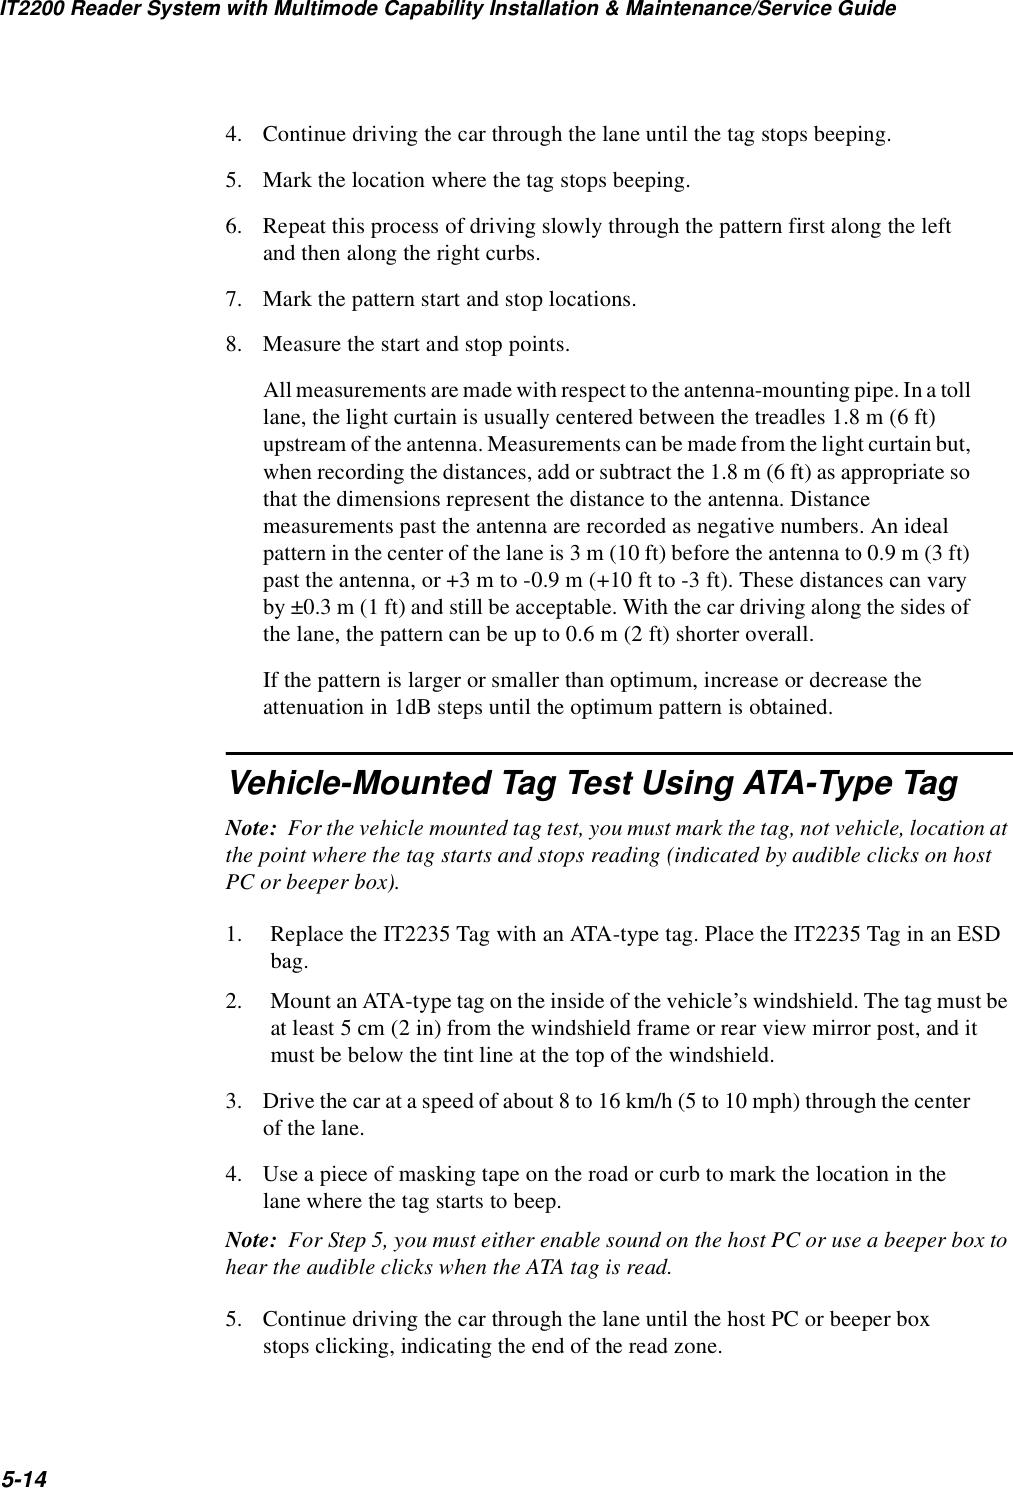 IT2200 Reader System with Multimode Capability Installation &amp; Maintenance/Service Guide5-144. Continue driving the car through the lane until the tag stops beeping. 5. Mark the location where the tag stops beeping.6. Repeat this process of driving slowly through the pattern first along the left and then along the right curbs.7. Mark the pattern start and stop locations.8. Measure the start and stop points.All measurements are made with respect to the antenna-mounting pipe. In a toll lane, the light curtain is usually centered between the treadles 1.8 m (6 ft) upstream of the antenna. Measurements can be made from the light curtain but, when recording the distances, add or subtract the 1.8 m (6 ft) as appropriate so that the dimensions represent the distance to the antenna. Distance measurements past the antenna are recorded as negative numbers. An ideal pattern in the center of the lane is 3 m (10 ft) before the antenna to 0.9 m (3 ft) past the antenna, or +3 m to -0.9 m (+10 ft to -3 ft). These distances can vary by ±0.3 m (1 ft) and still be acceptable. With the car driving along the sides of the lane, the pattern can be up to 0.6 m (2 ft) shorter overall.If the pattern is larger or smaller than optimum, increase or decrease the attenuation in 1dB steps until the optimum pattern is obtained.Vehicle-Mounted Tag Test Using ATA-Type TagNote:  For the vehicle mounted tag test, you must mark the tag, not vehicle, location at the point where the tag starts and stops reading (indicated by audible clicks on host PC or beeper box).1. Replace the IT2235 Tag with an ATA-type tag. Place the IT2235 Tag in an ESD bag.2. Mount an ATA-type tag on the inside of the vehicle’s windshield. The tag must be at least 5 cm (2 in) from the windshield frame or rear view mirror post, and it must be below the tint line at the top of the windshield.3. Drive the car at a speed of about 8 to 16 km/h (5 to 10 mph) through the center of the lane.4. Use a piece of masking tape on the road or curb to mark the location in the lane where the tag starts to beep.Note:  For Step 5, you must either enable sound on the host PC or use a beeper box to hear the audible clicks when the ATA tag is read.5. Continue driving the car through the lane until the host PC or beeper box stops clicking, indicating the end of the read zone.